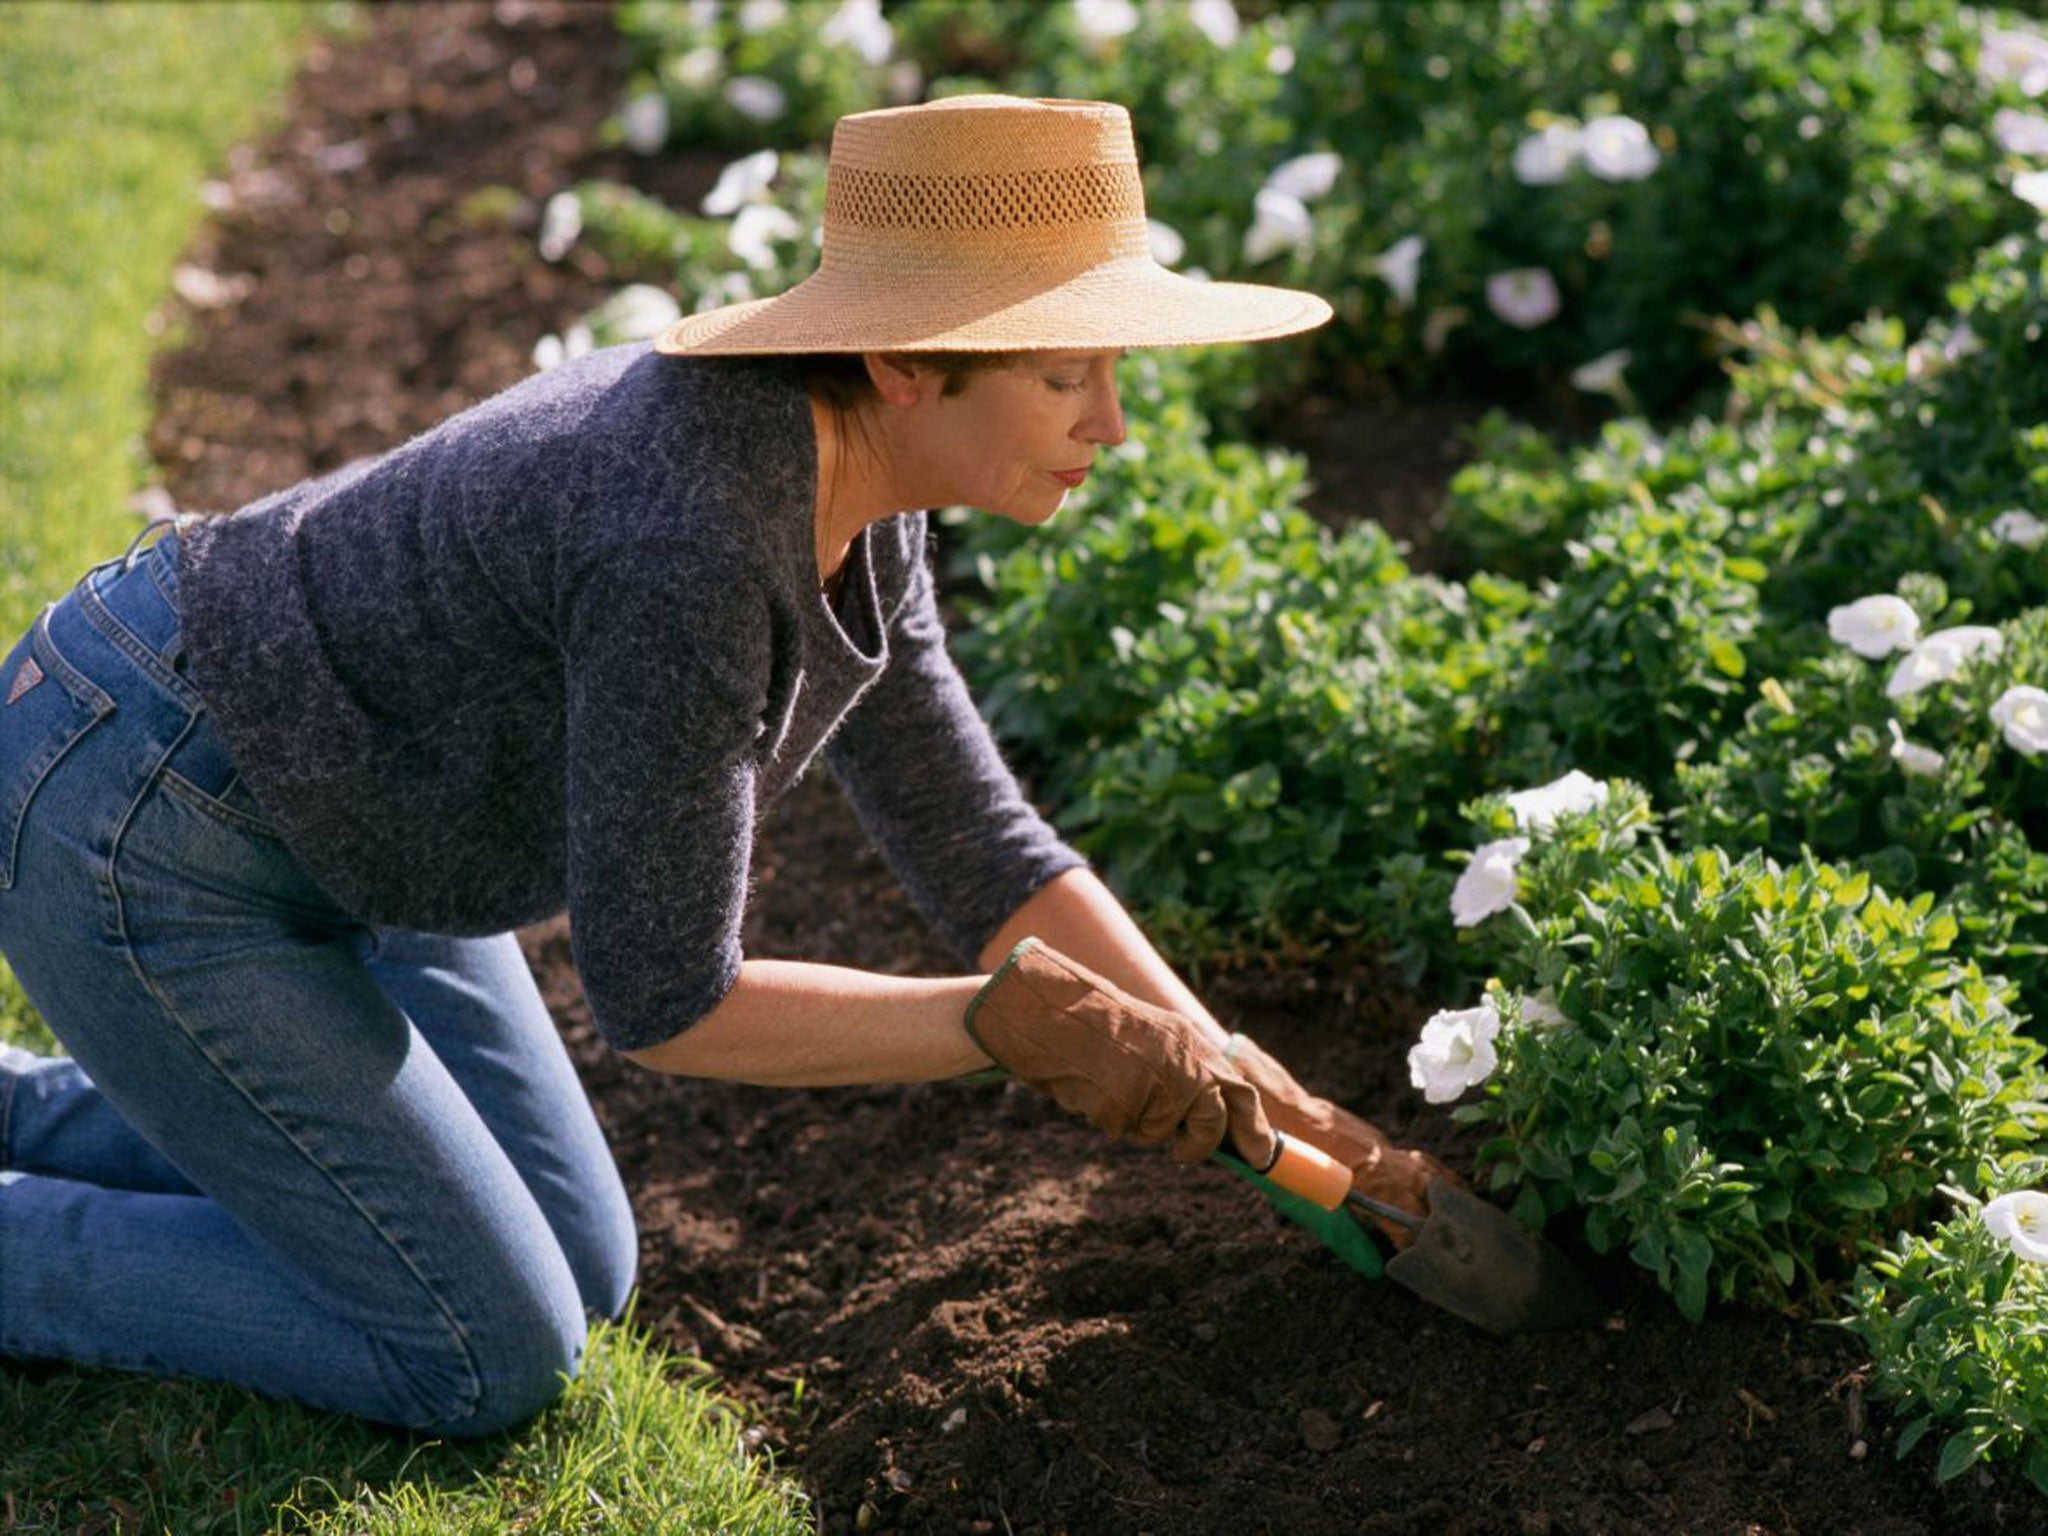 A spot of gardening is as good as rigorous exercise for fending off heart attacks and strokes